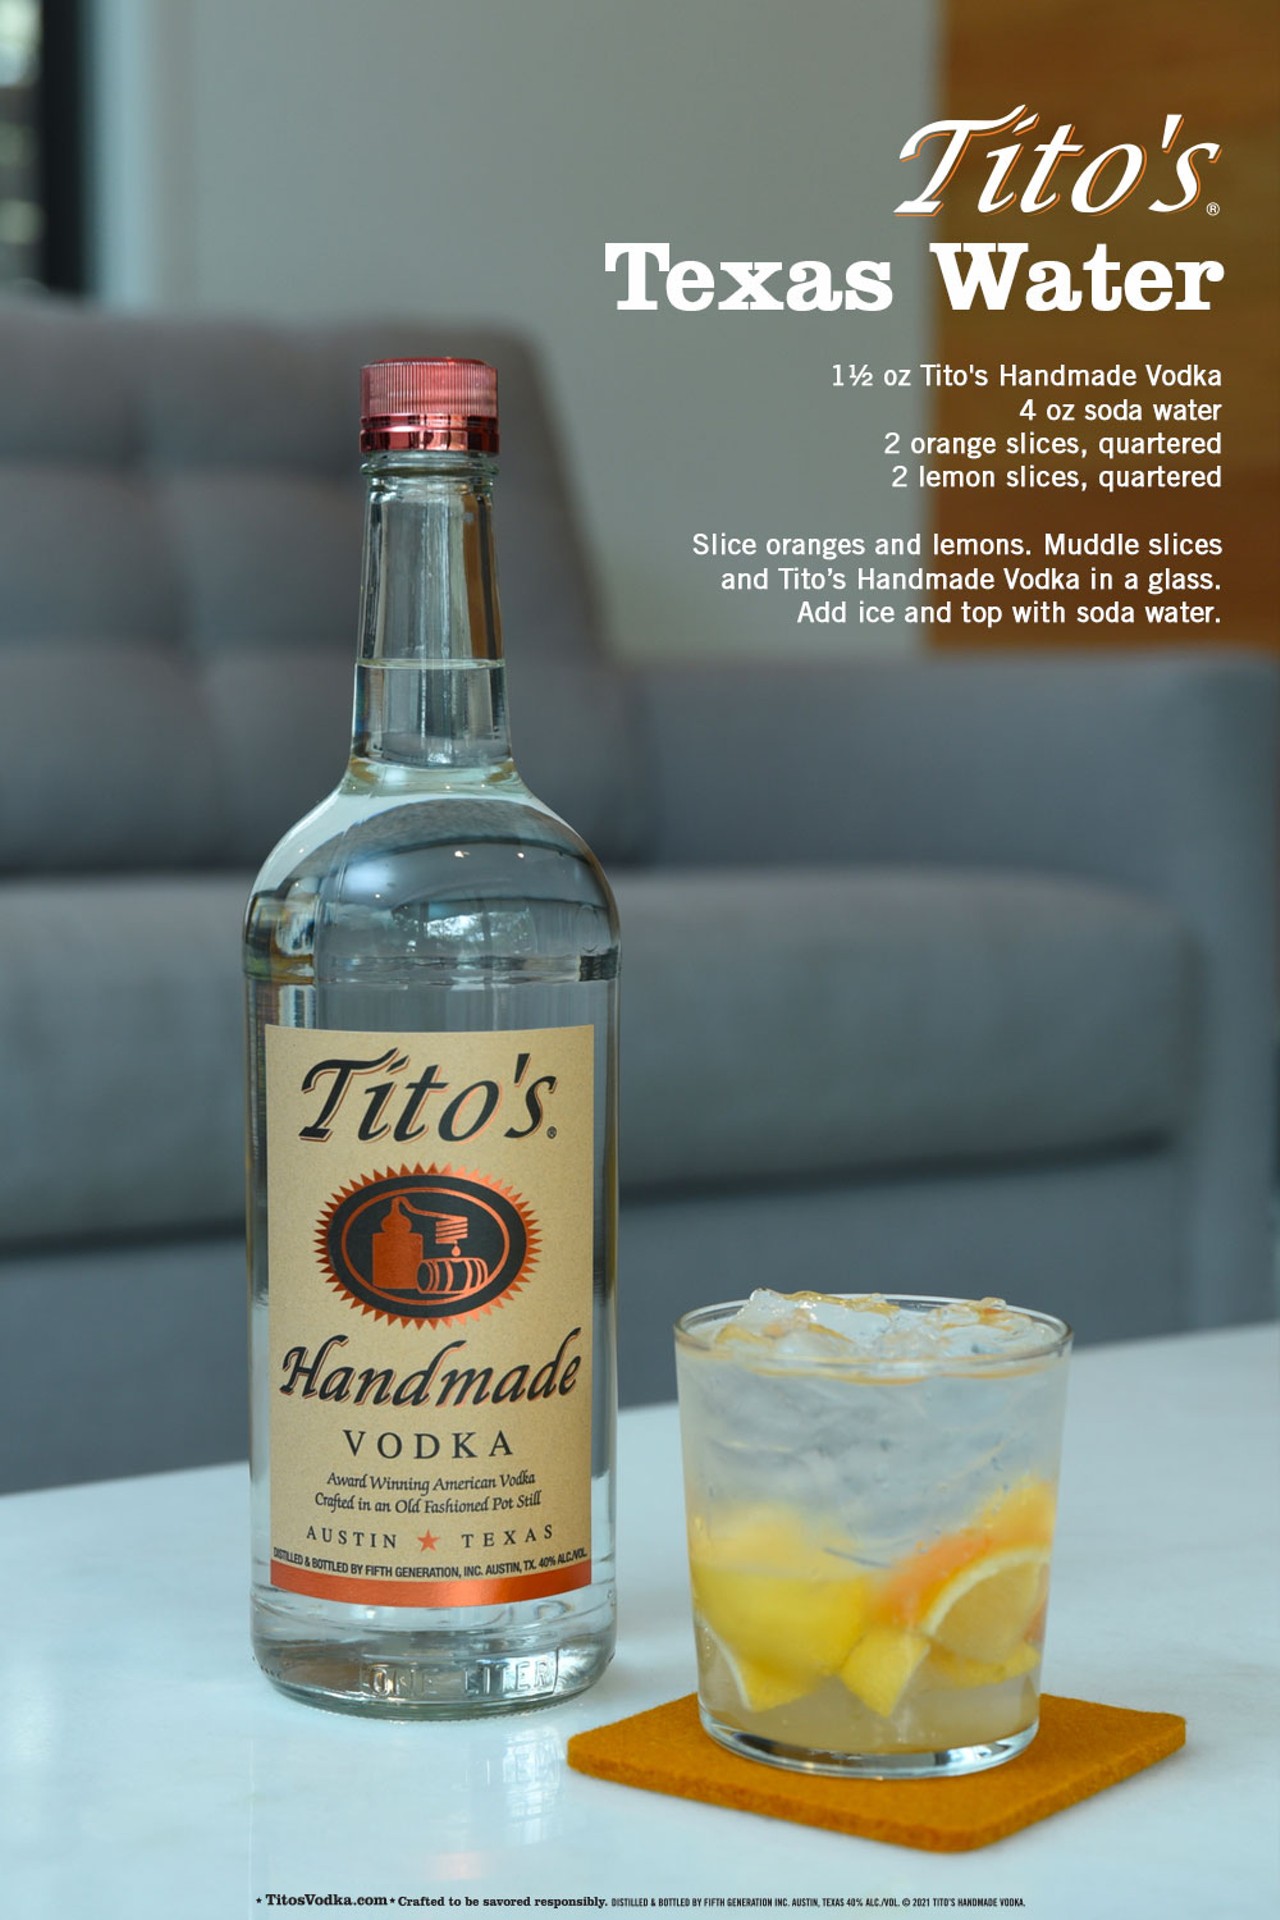 You'll Want To Try These Tito's Handmade Vodka Cocktails This Spring!